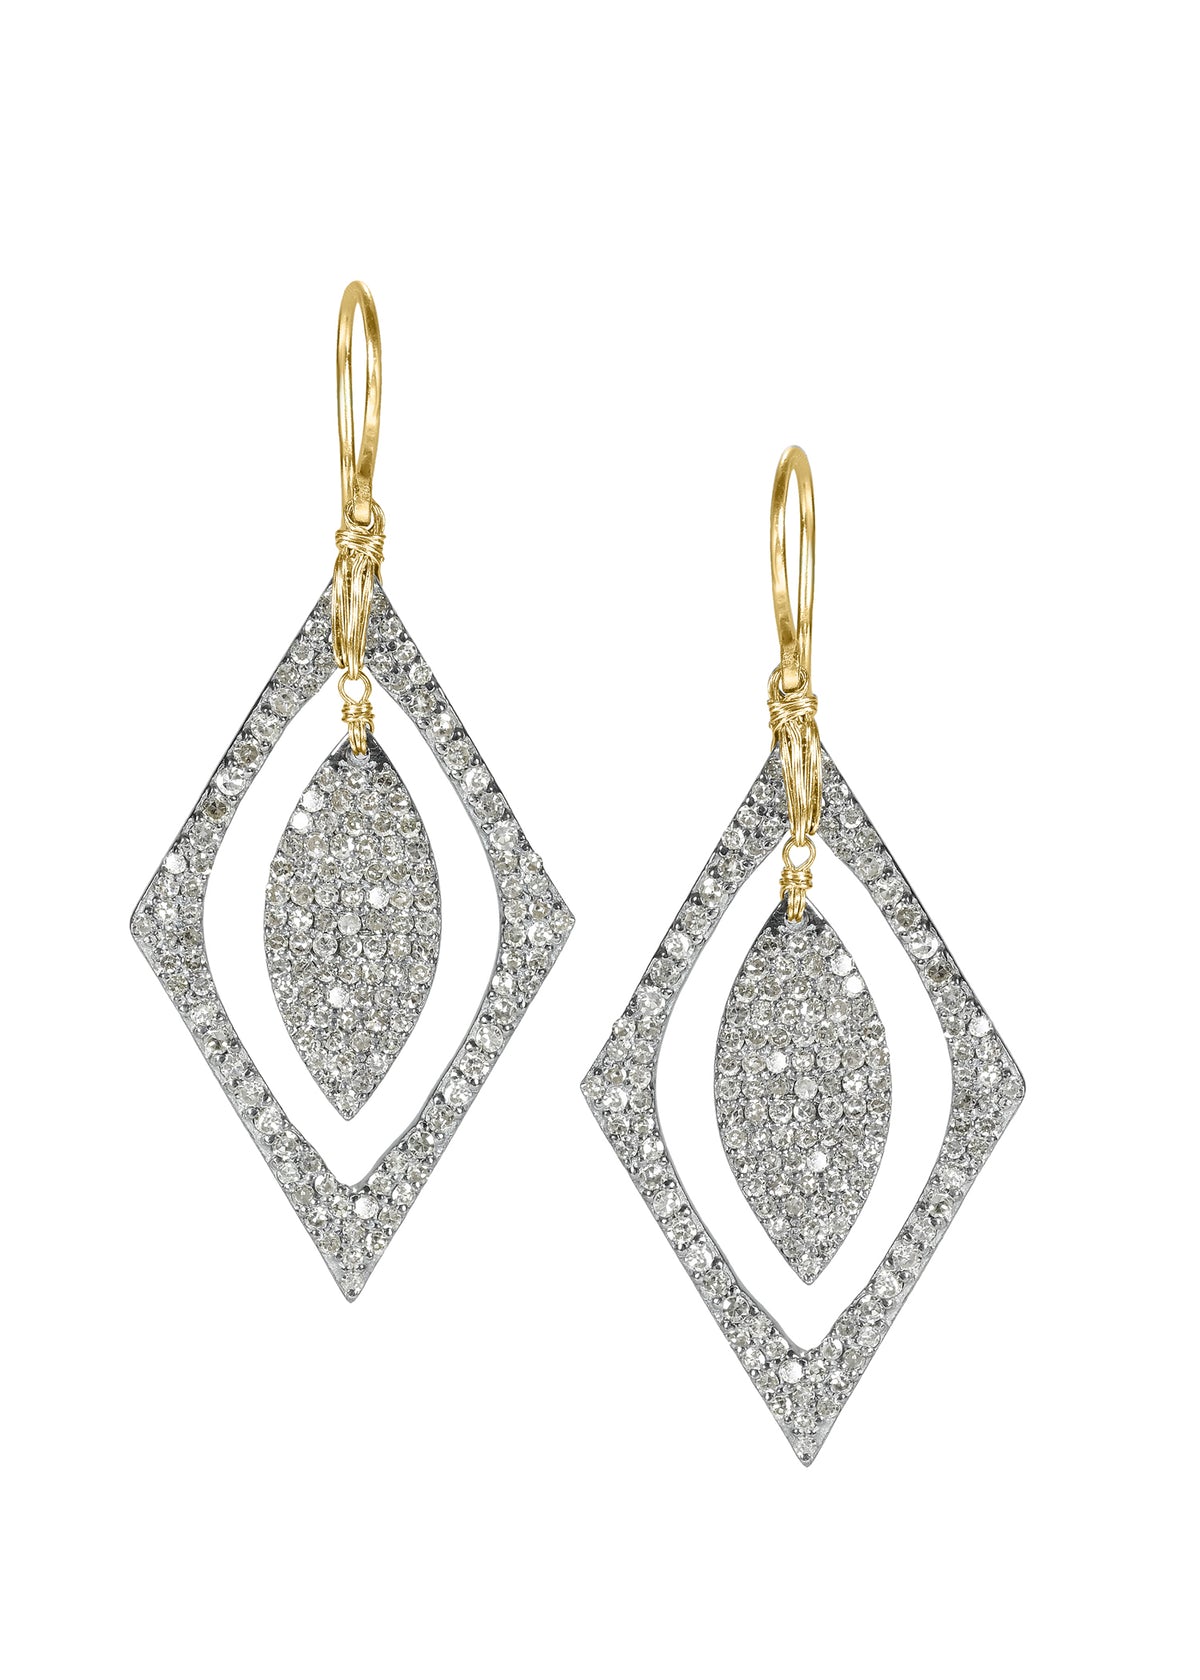 Diamond 14k gold Sterling silver Mixed metal Special order only Earrings measure 2&quot; in length (including the ear wires) and 7/8&quot; in width at the widest point Handmade in our Los Angeles studio 